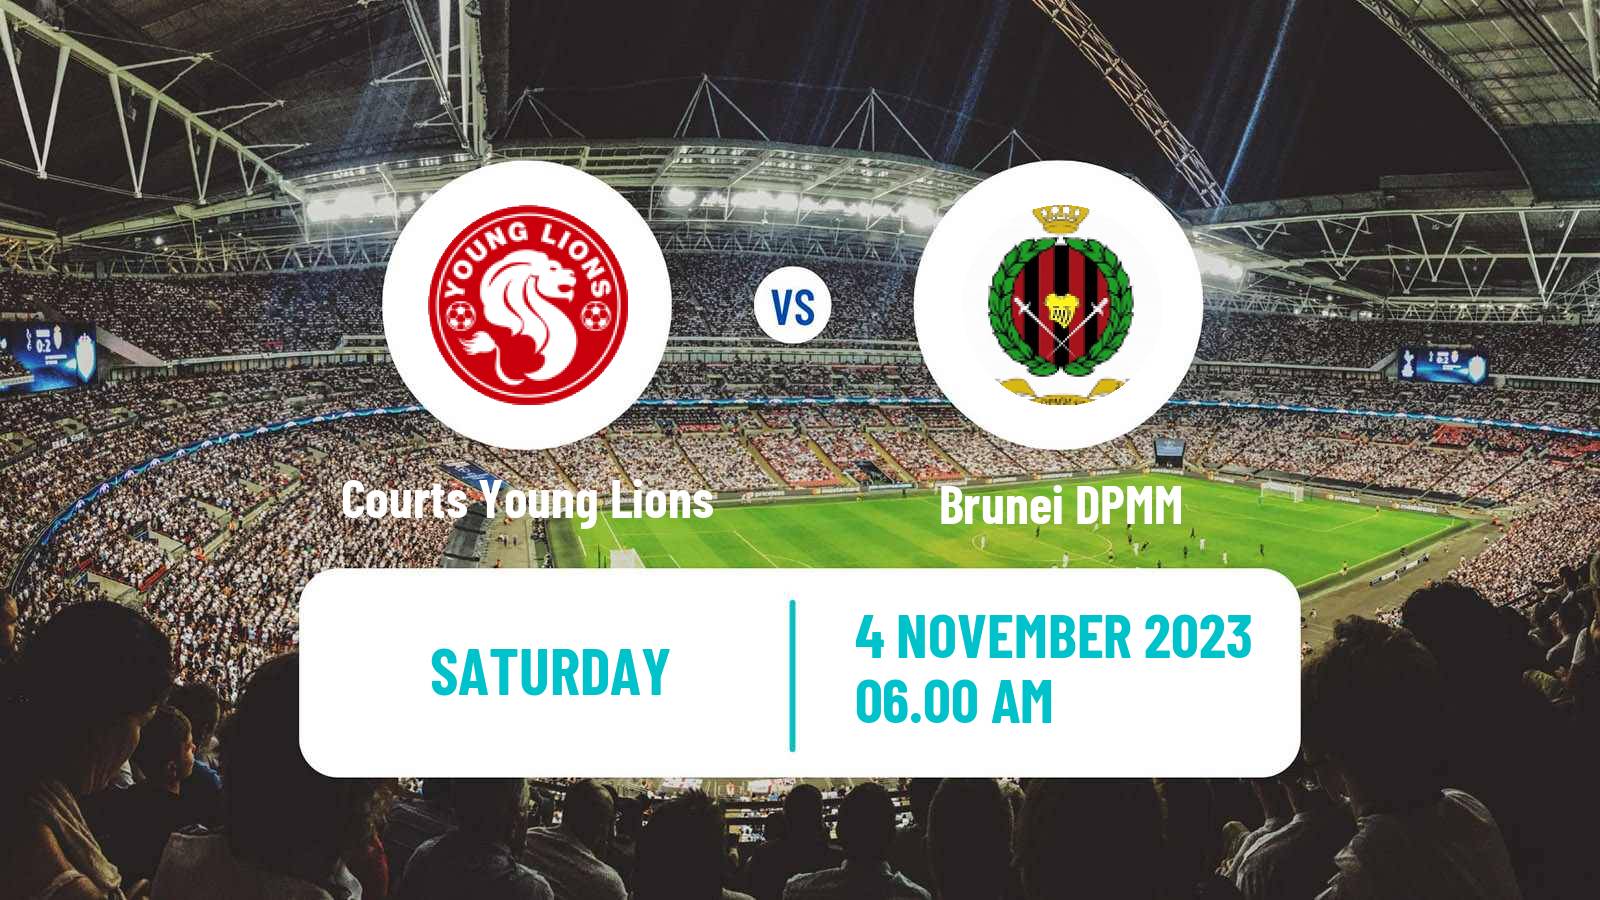 Soccer Singapore Cup Courts Young Lions - Brunei DPMM